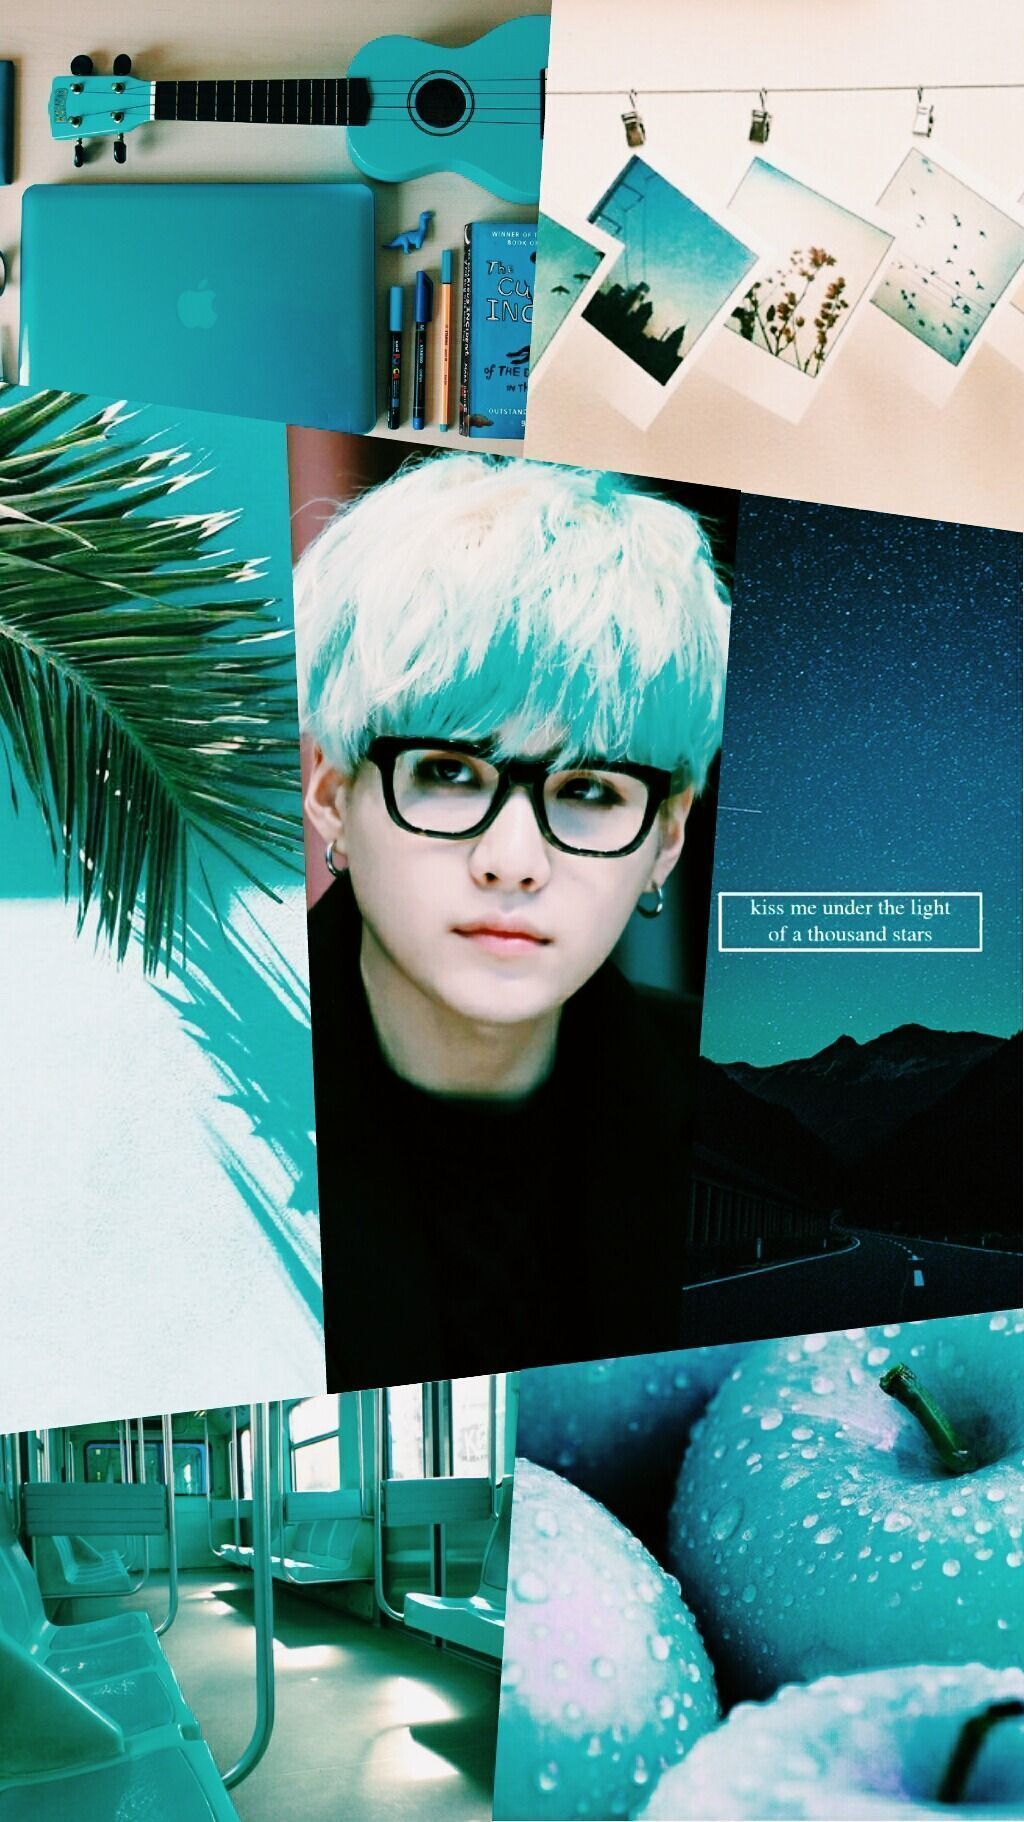 Collage of BTS member Jimin with glasses and blue hair - Suga